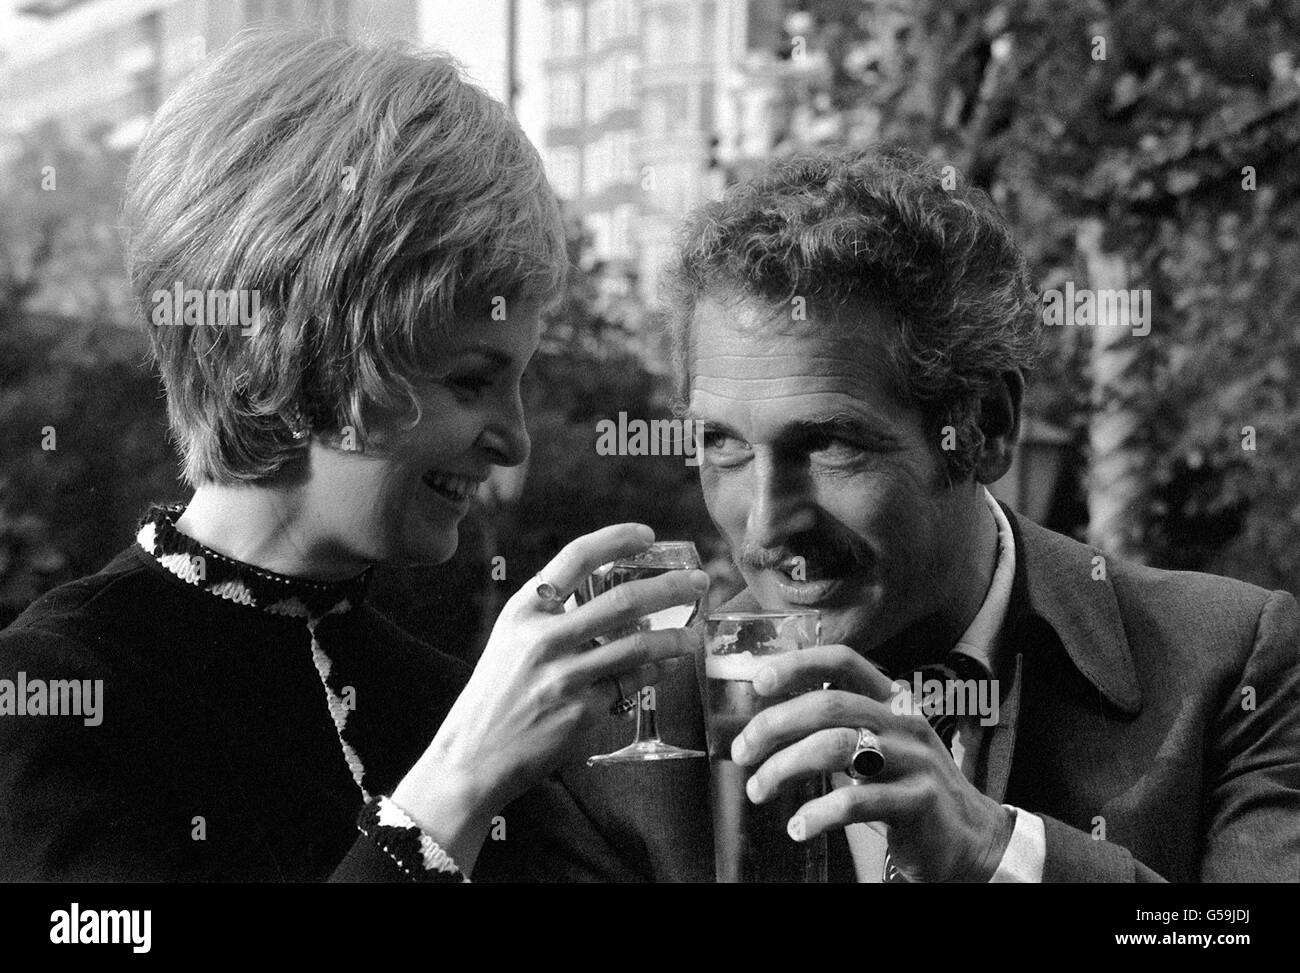 Hollywood celebrity couple, actor Paul Newman and his wife Joanne Woodward, enjoying a holiday in England at Les Ambassadeurs, in London. Stock Photo